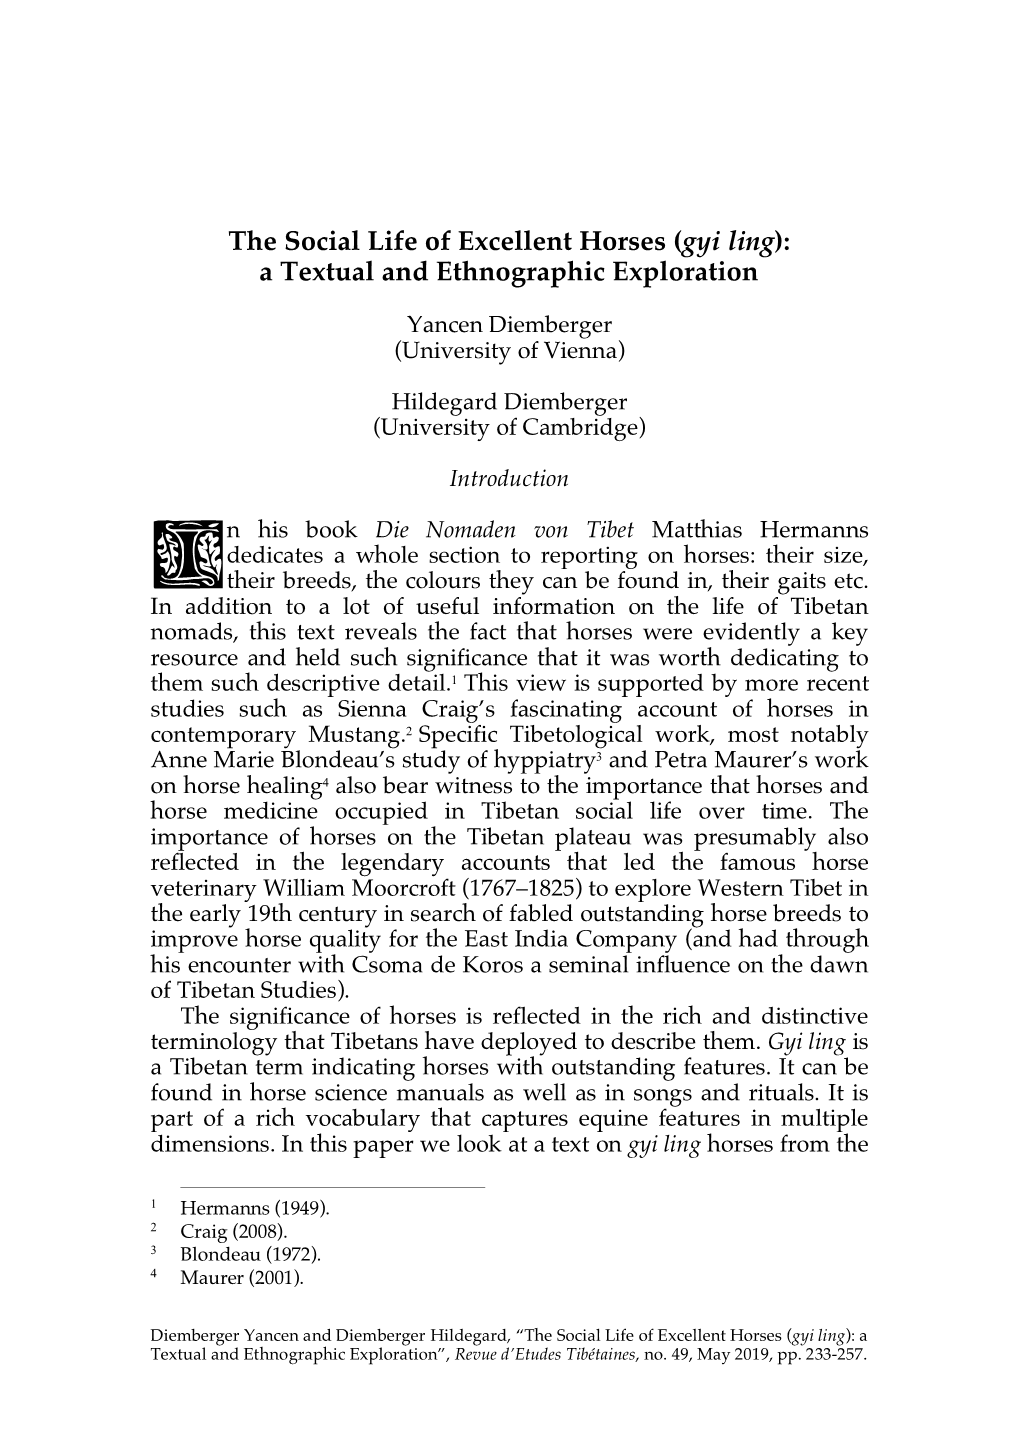 The Social Life of Excellent Horses (Gyi Ling): a Textual and Ethnographic Exploration